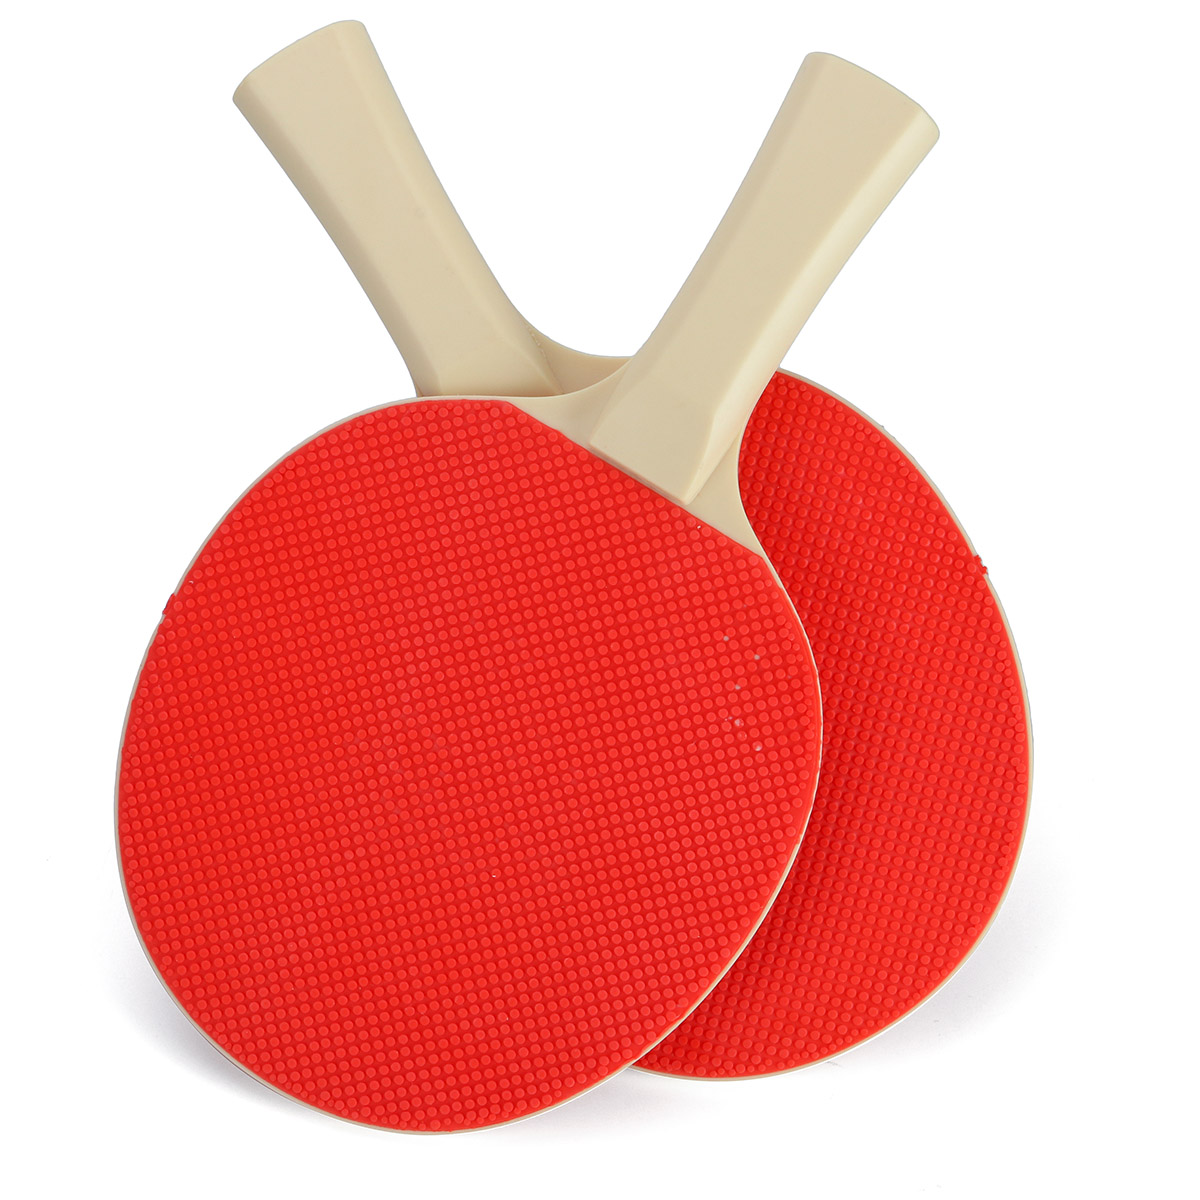 17M-Retractable-Ping-Pong-Net-Set-For-Any-Table-2-Table-Tennis-Paddles-Home-Indoor-Training-Outdoor--1780336-6